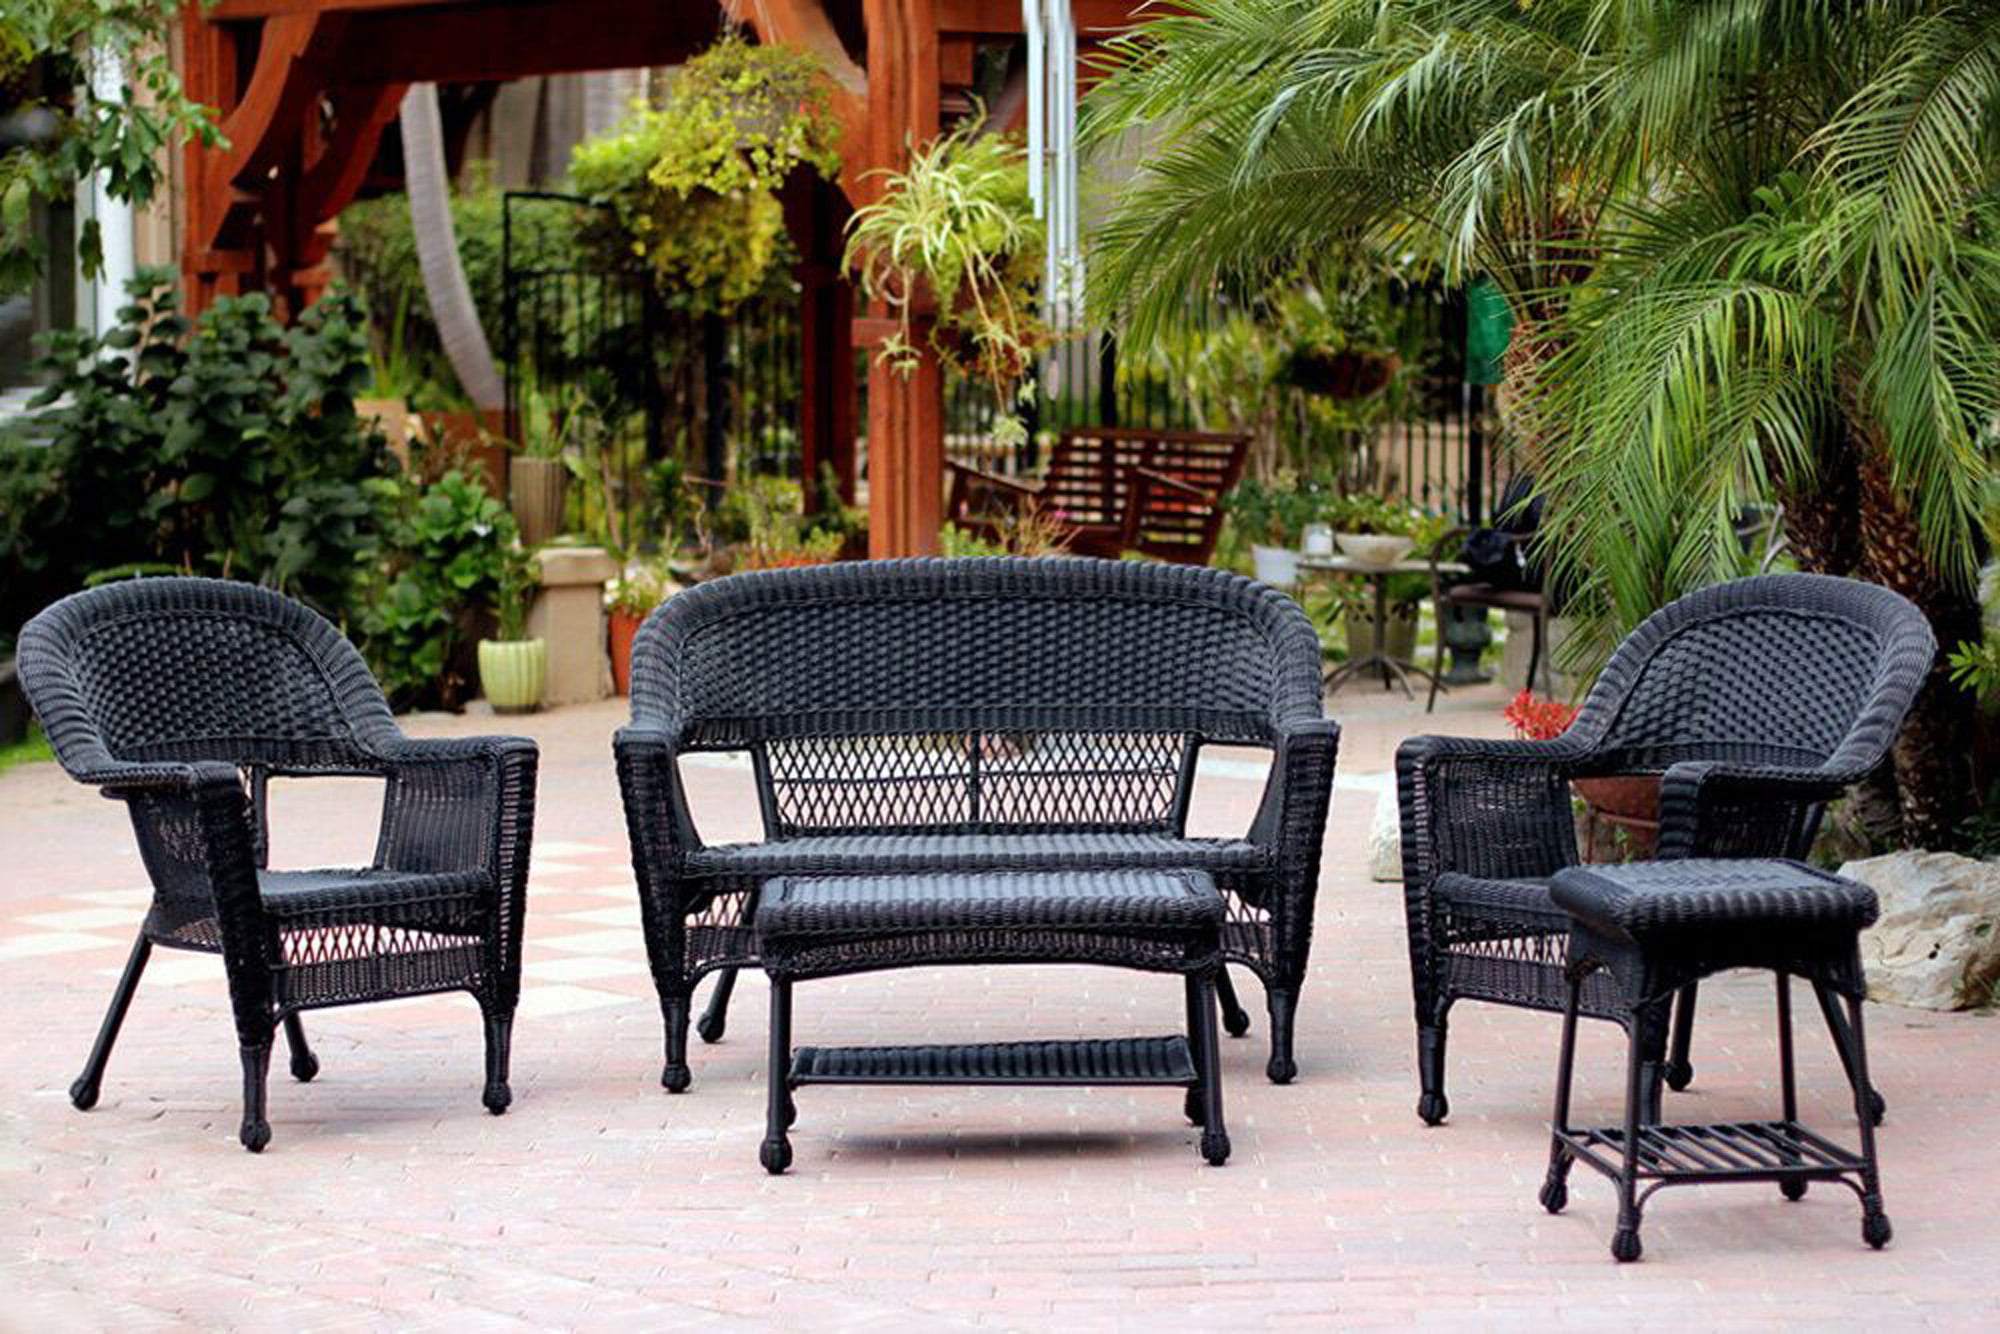 5-Piece Black Resin Wicker Patio Chair, Loveseat and Table Furniture